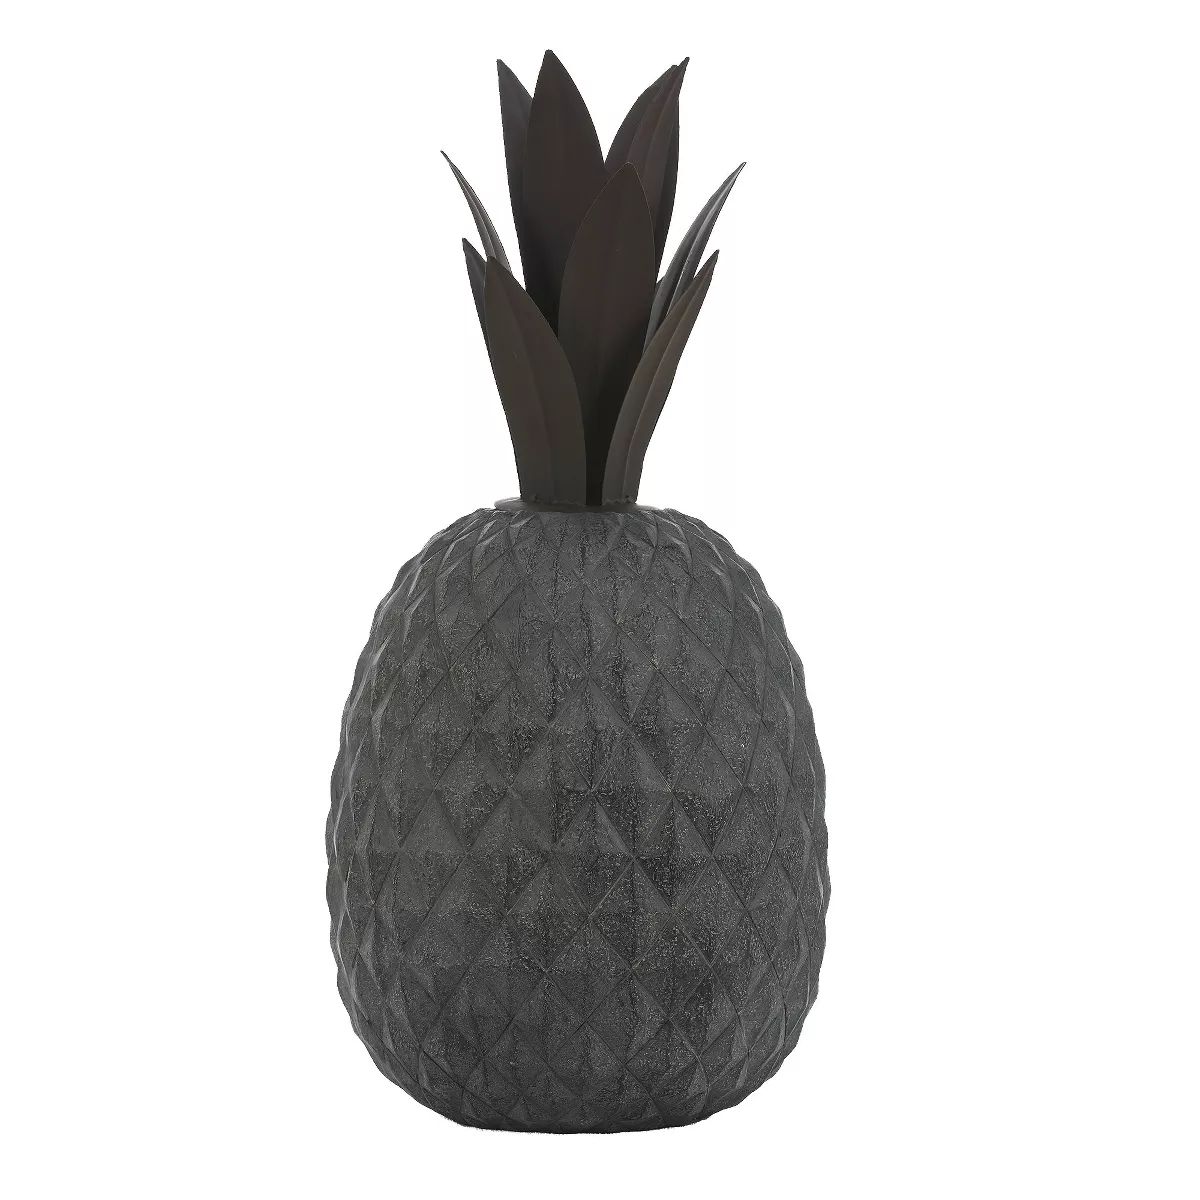 LuxenHome 23.6" Gray MgO Pineapple Outdoor Statue | Target